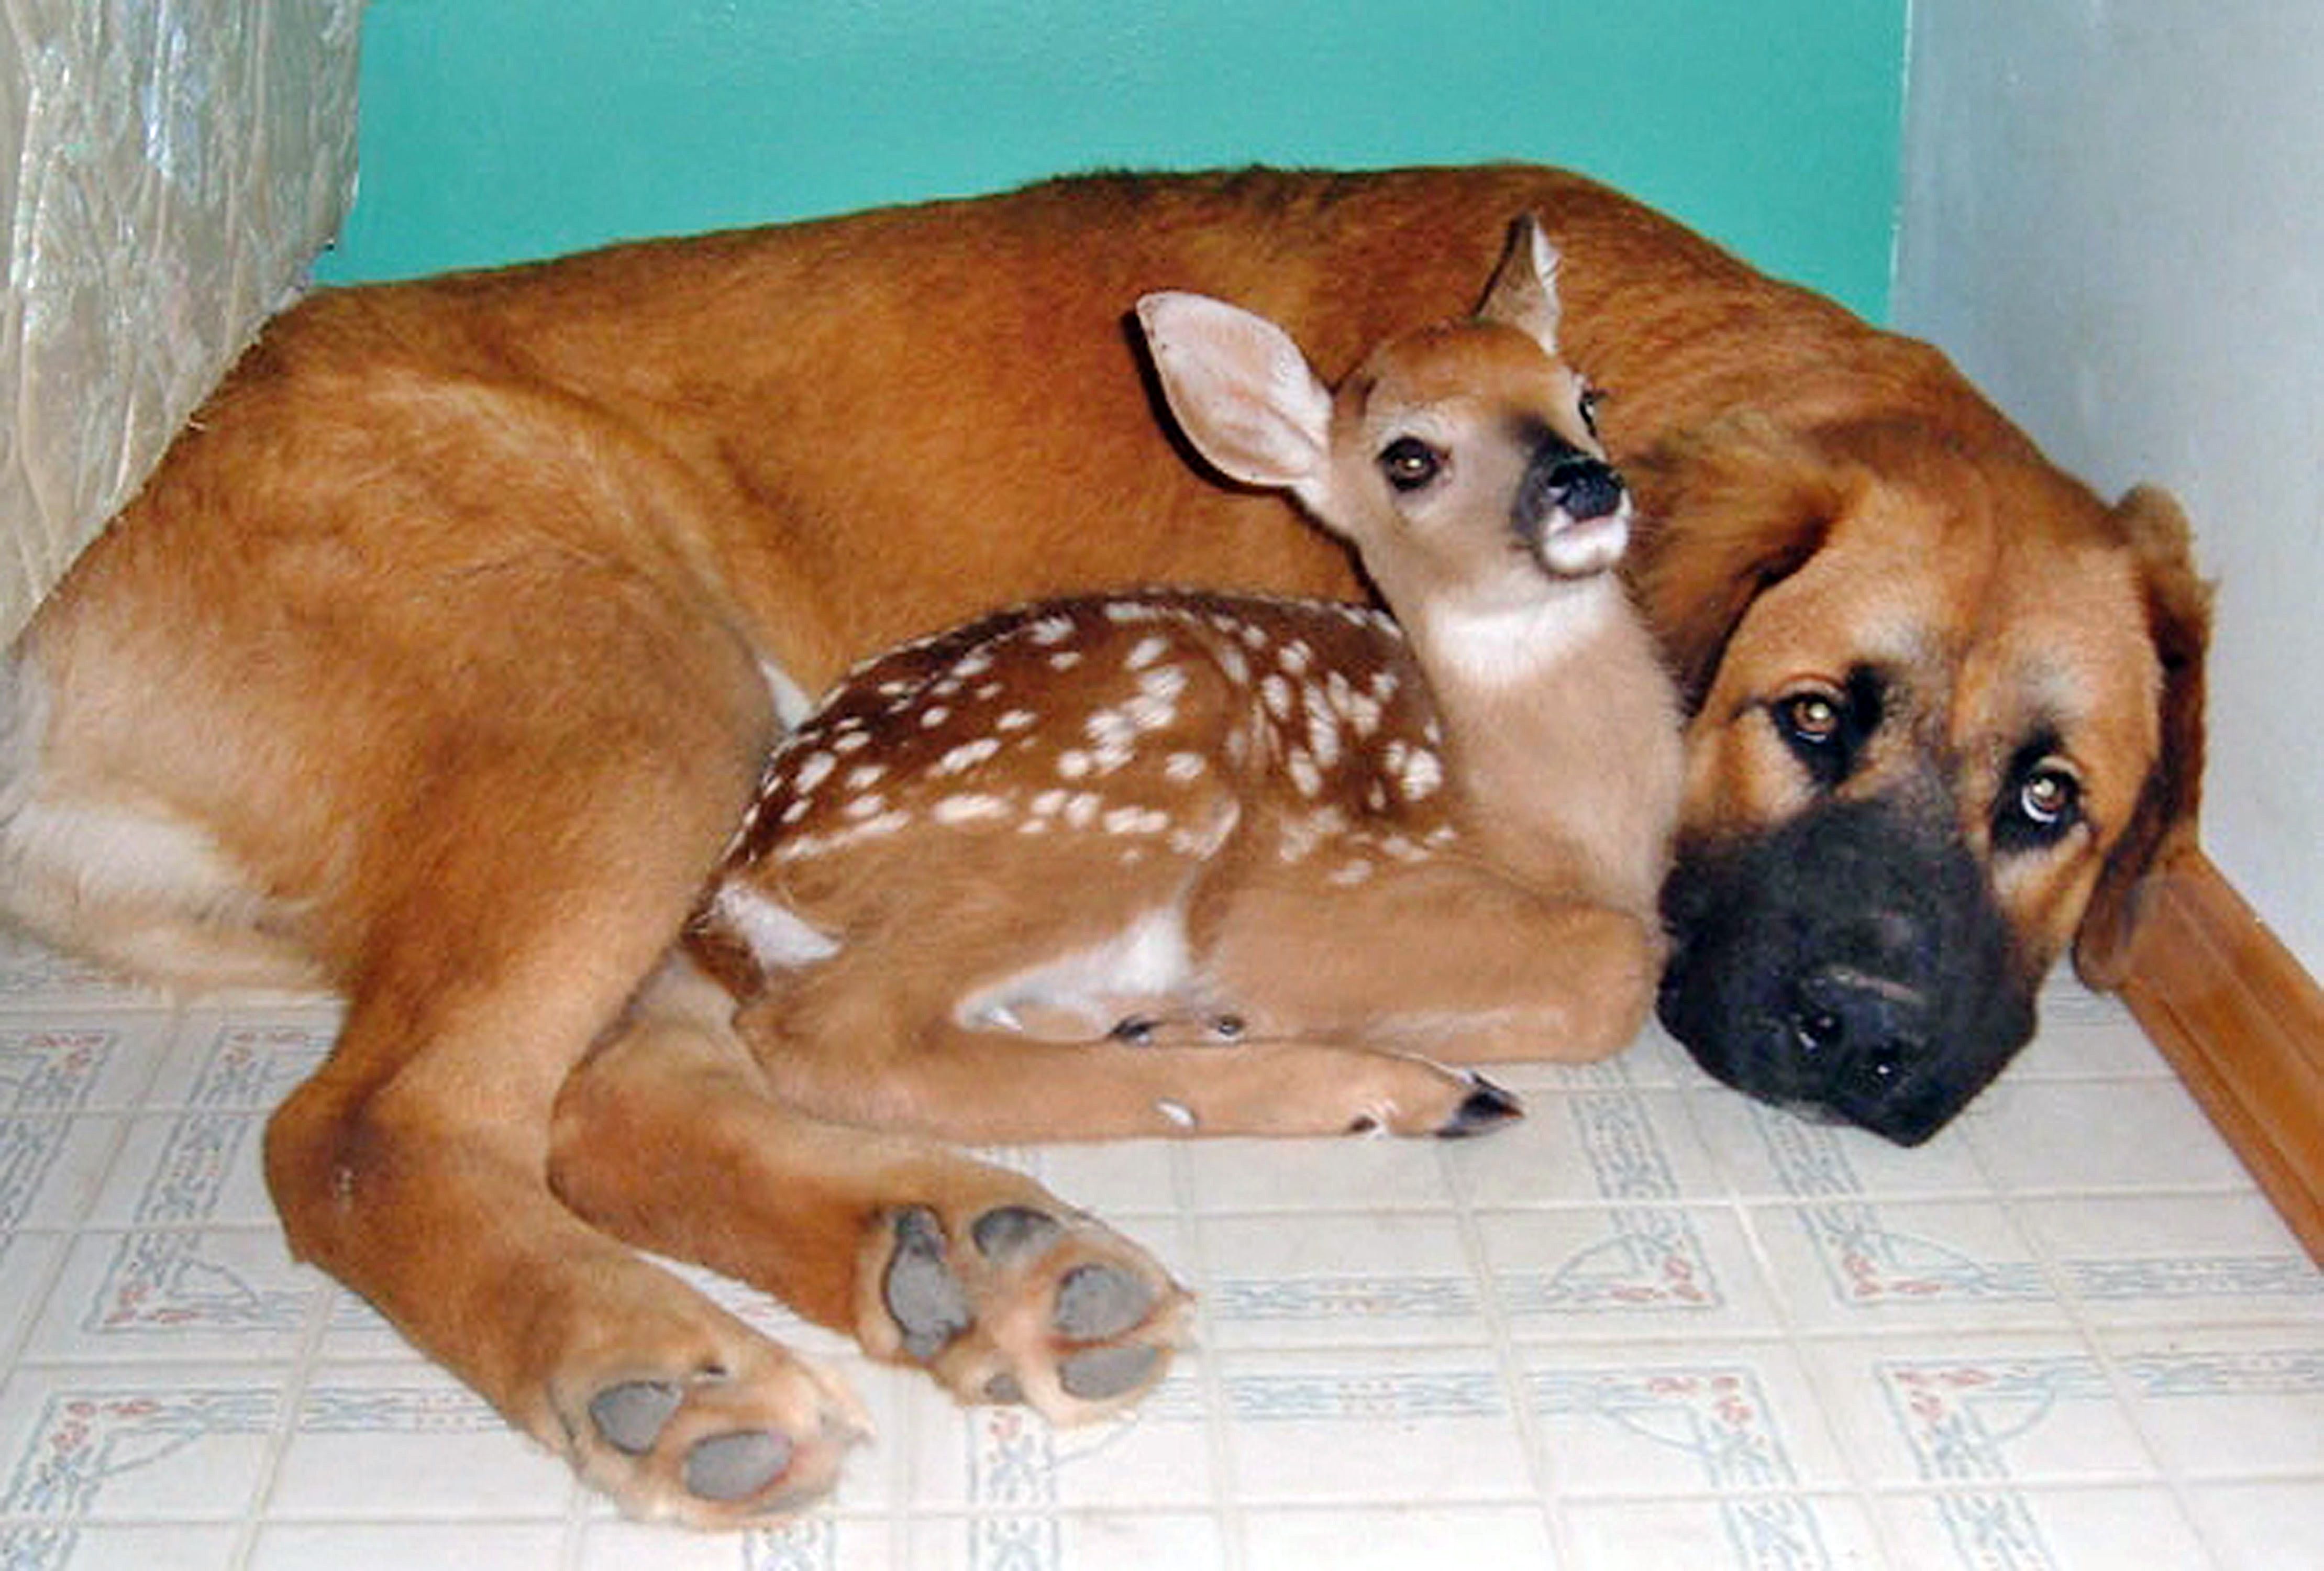 You can't help who you love and these animals prove it